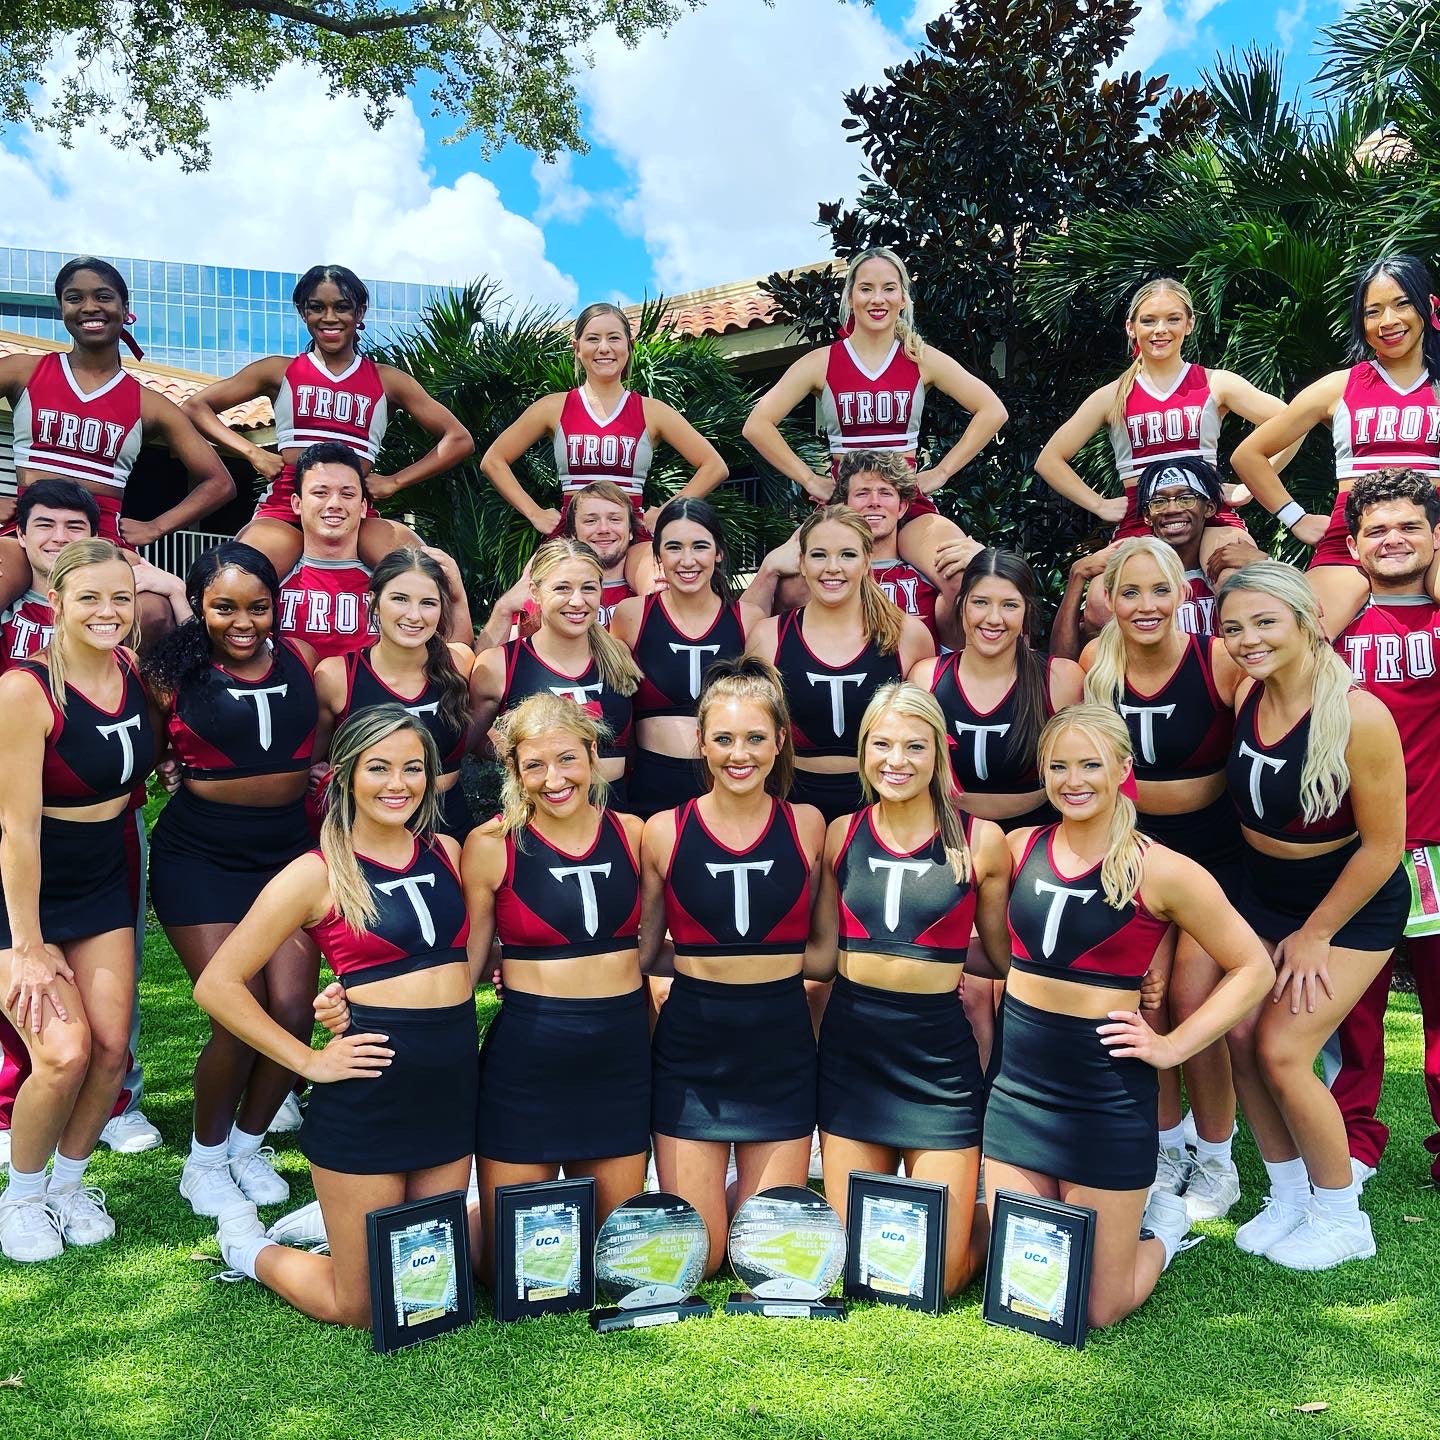 Troy Cheer Brings Home Three Top2 Finishes from UCA Cheer Camp The